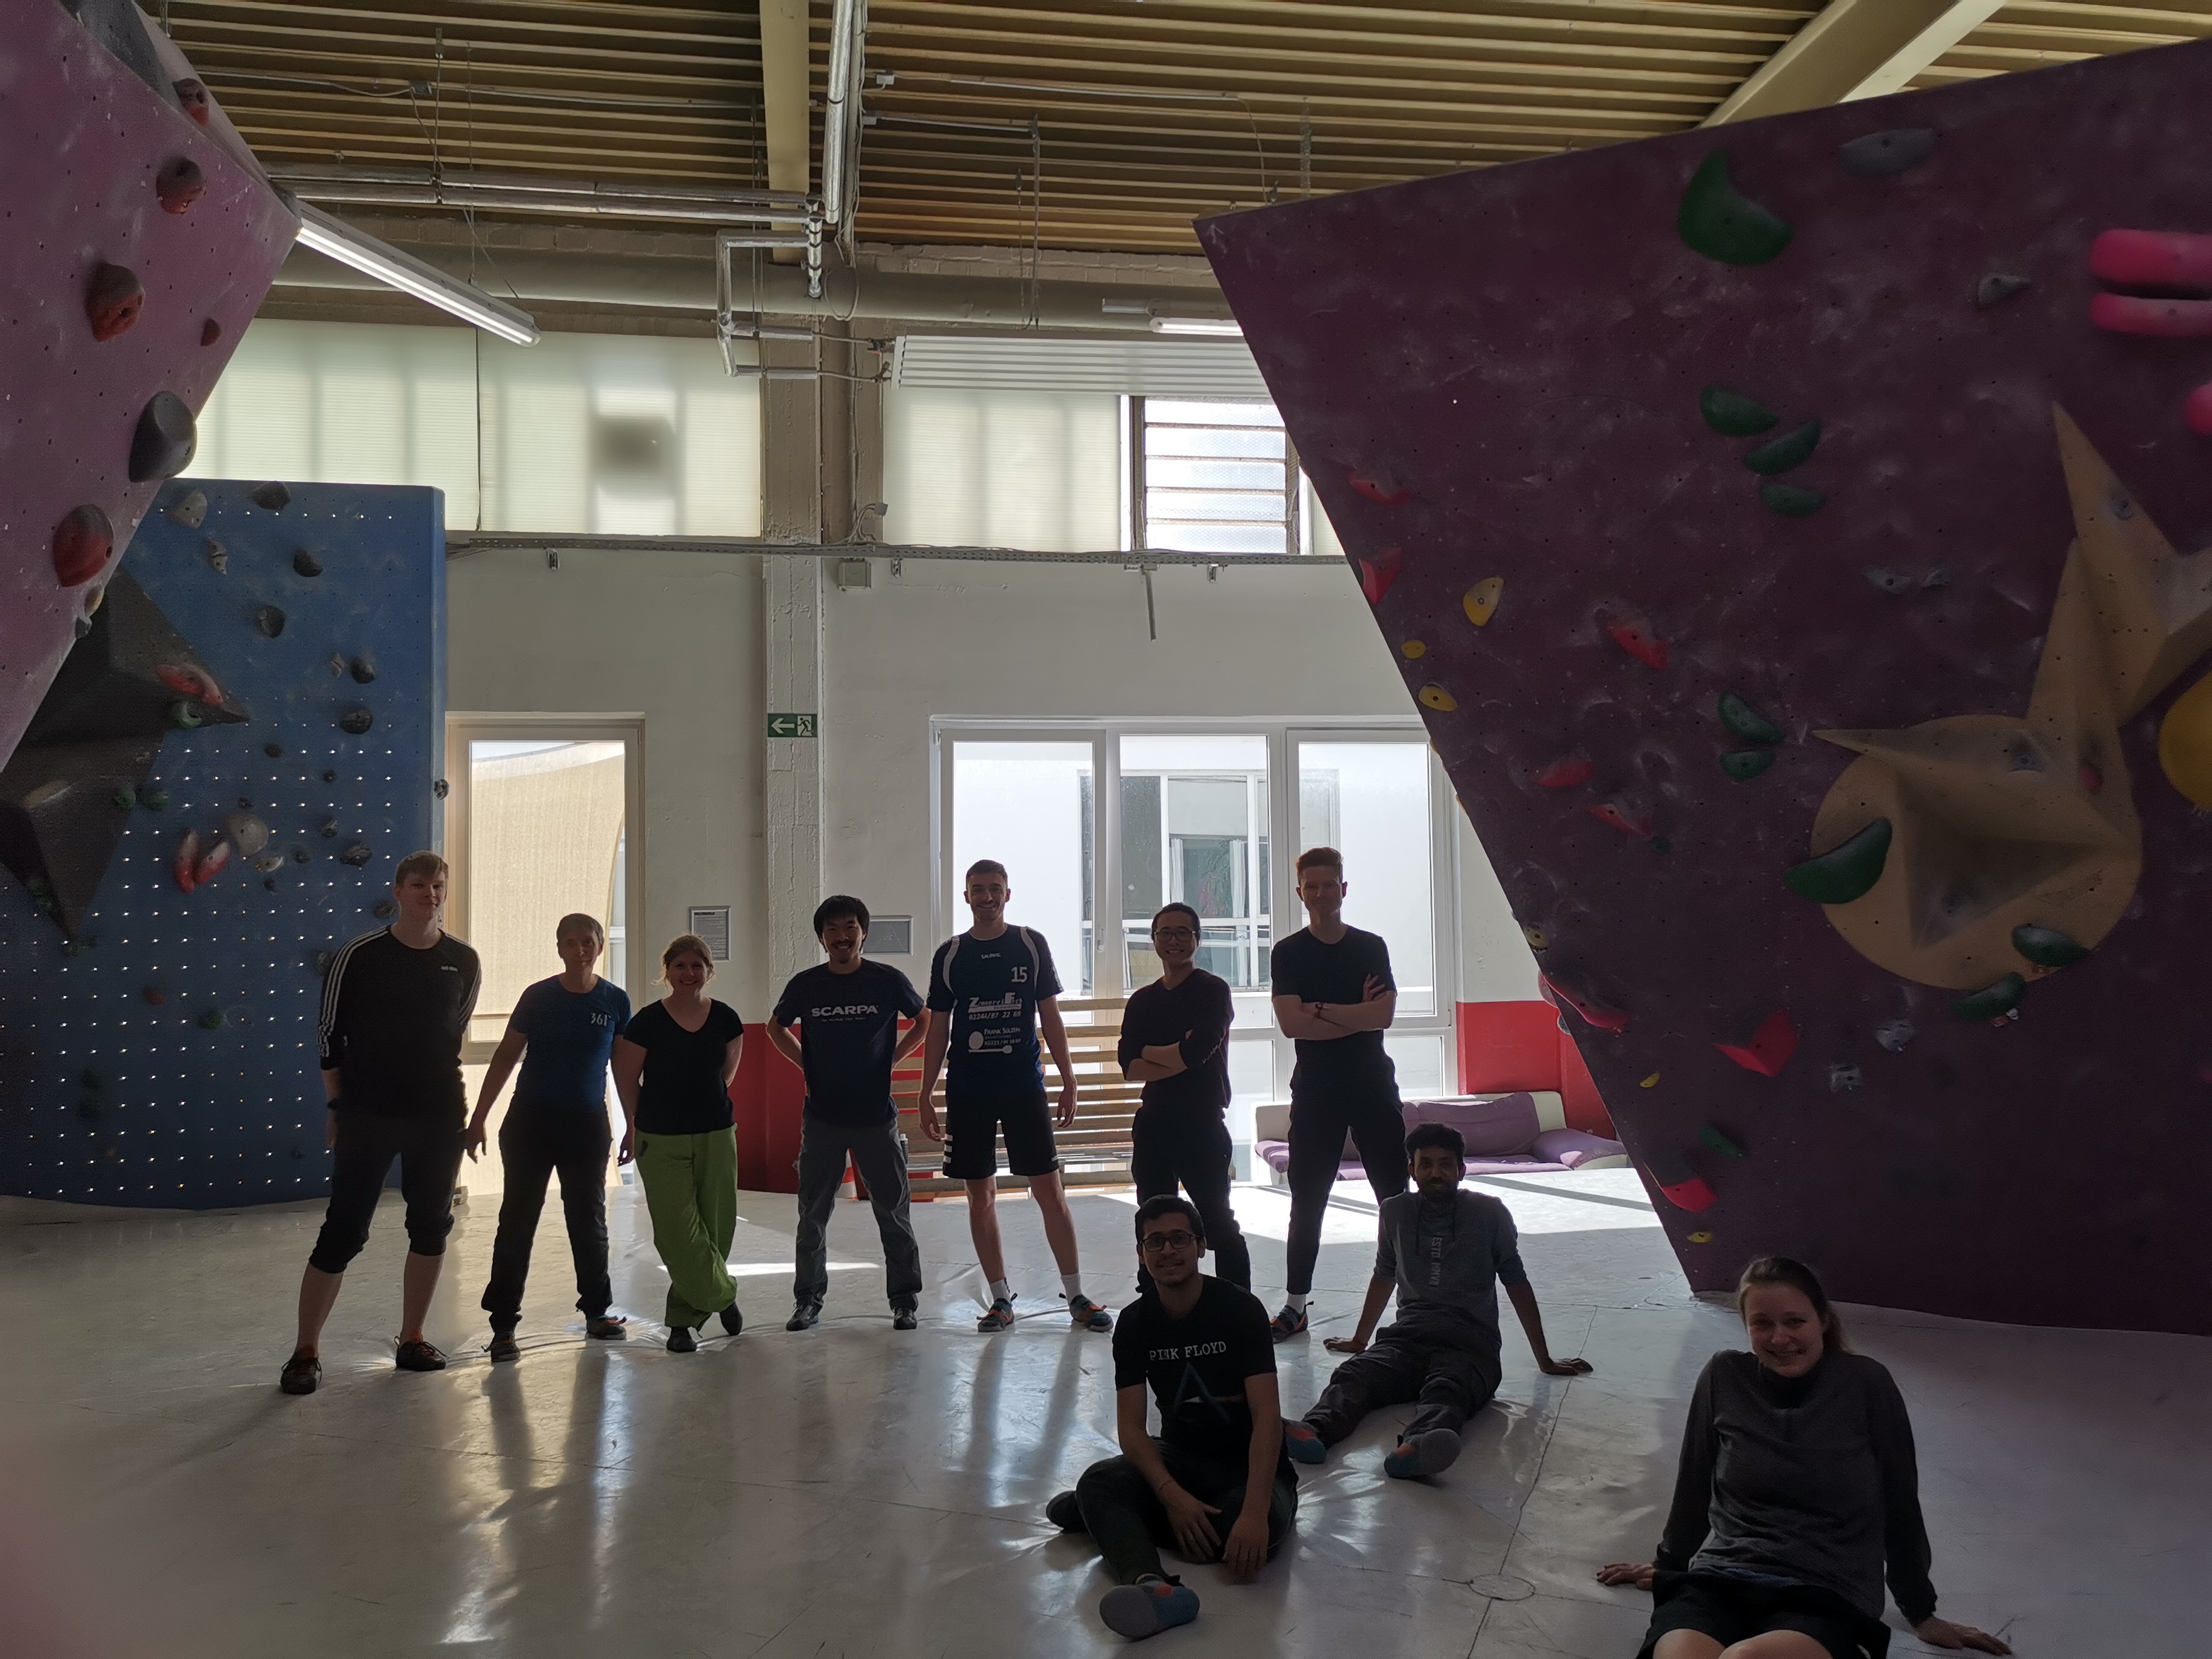 27.03.23 Group event in climbing gym in Endenich